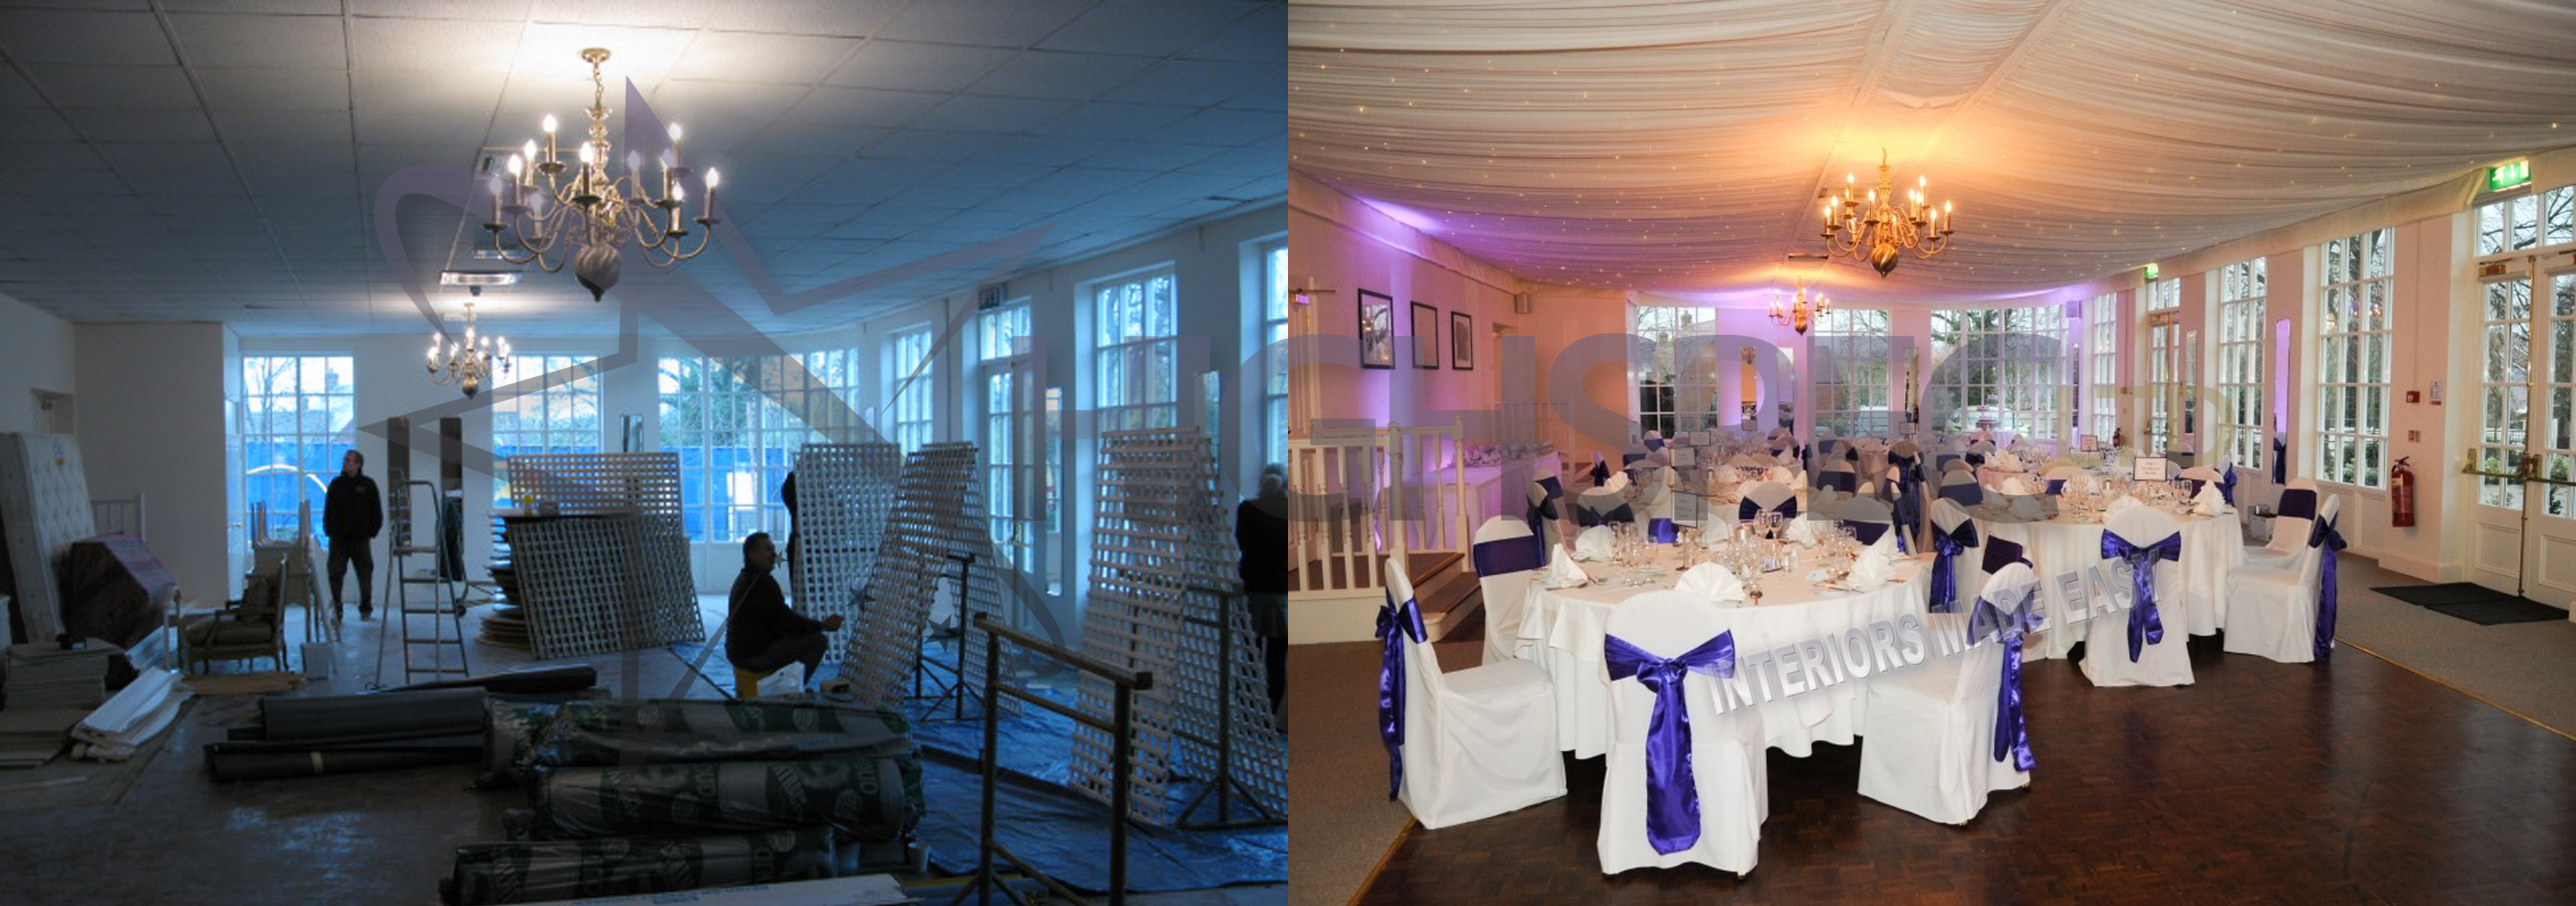 Venue draping - Event draping starlight ceiling